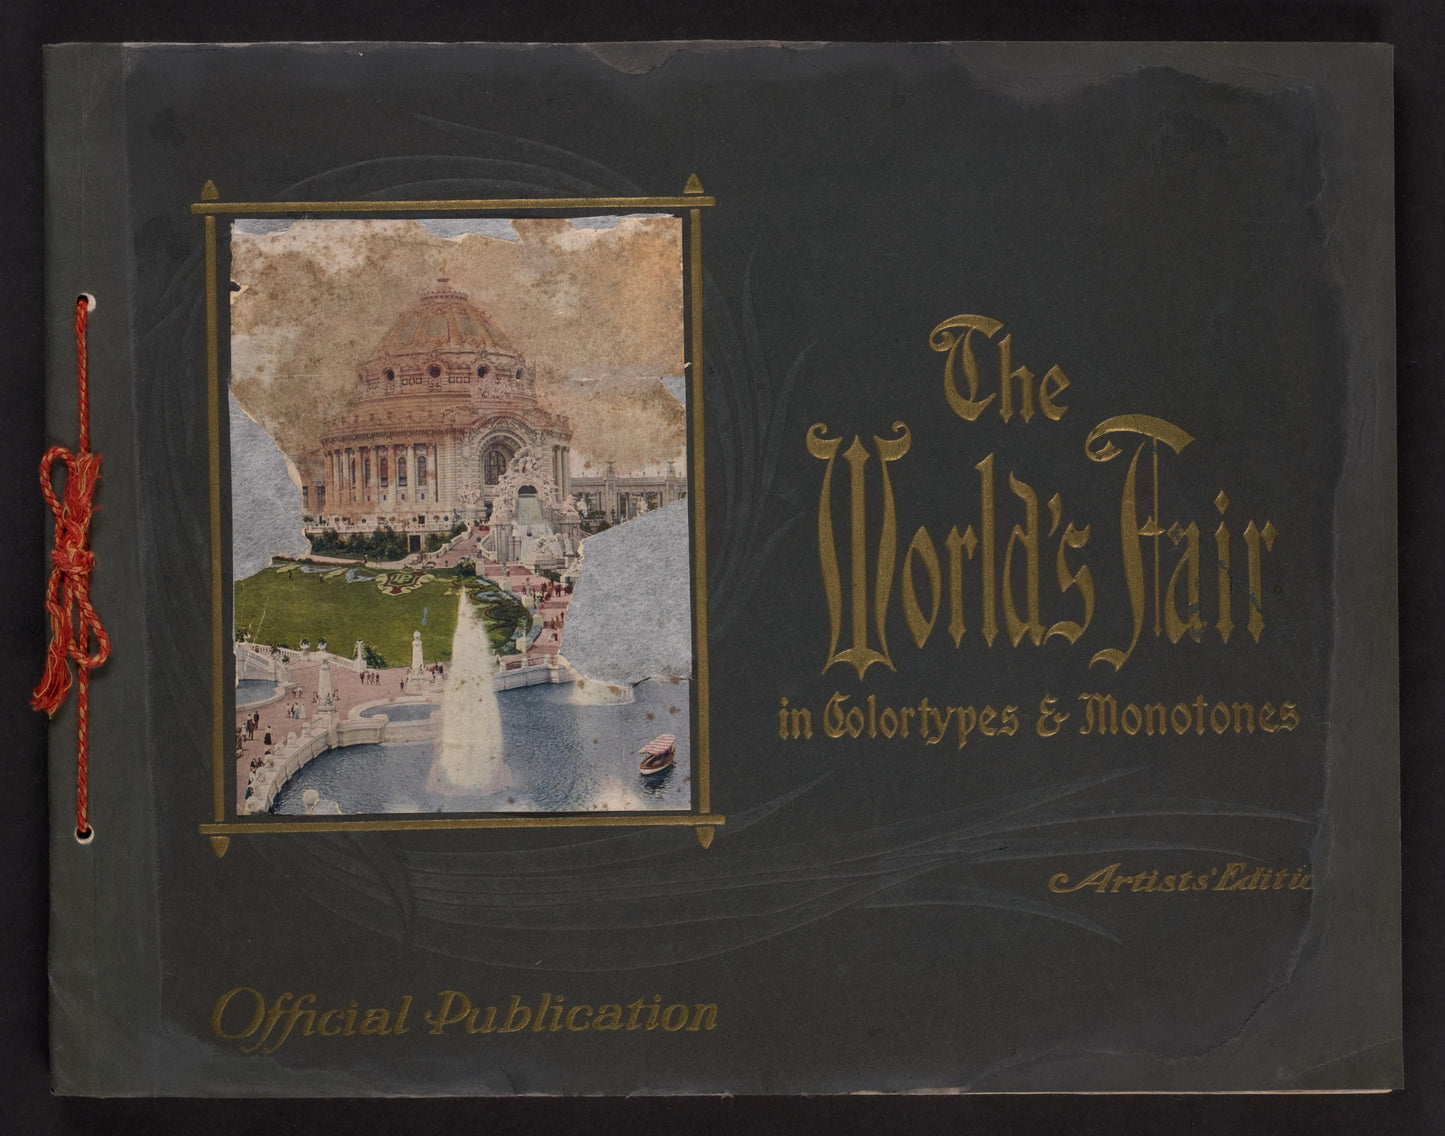 Louisiana Purchase Exposition 1904 - 3 Reprints in 1